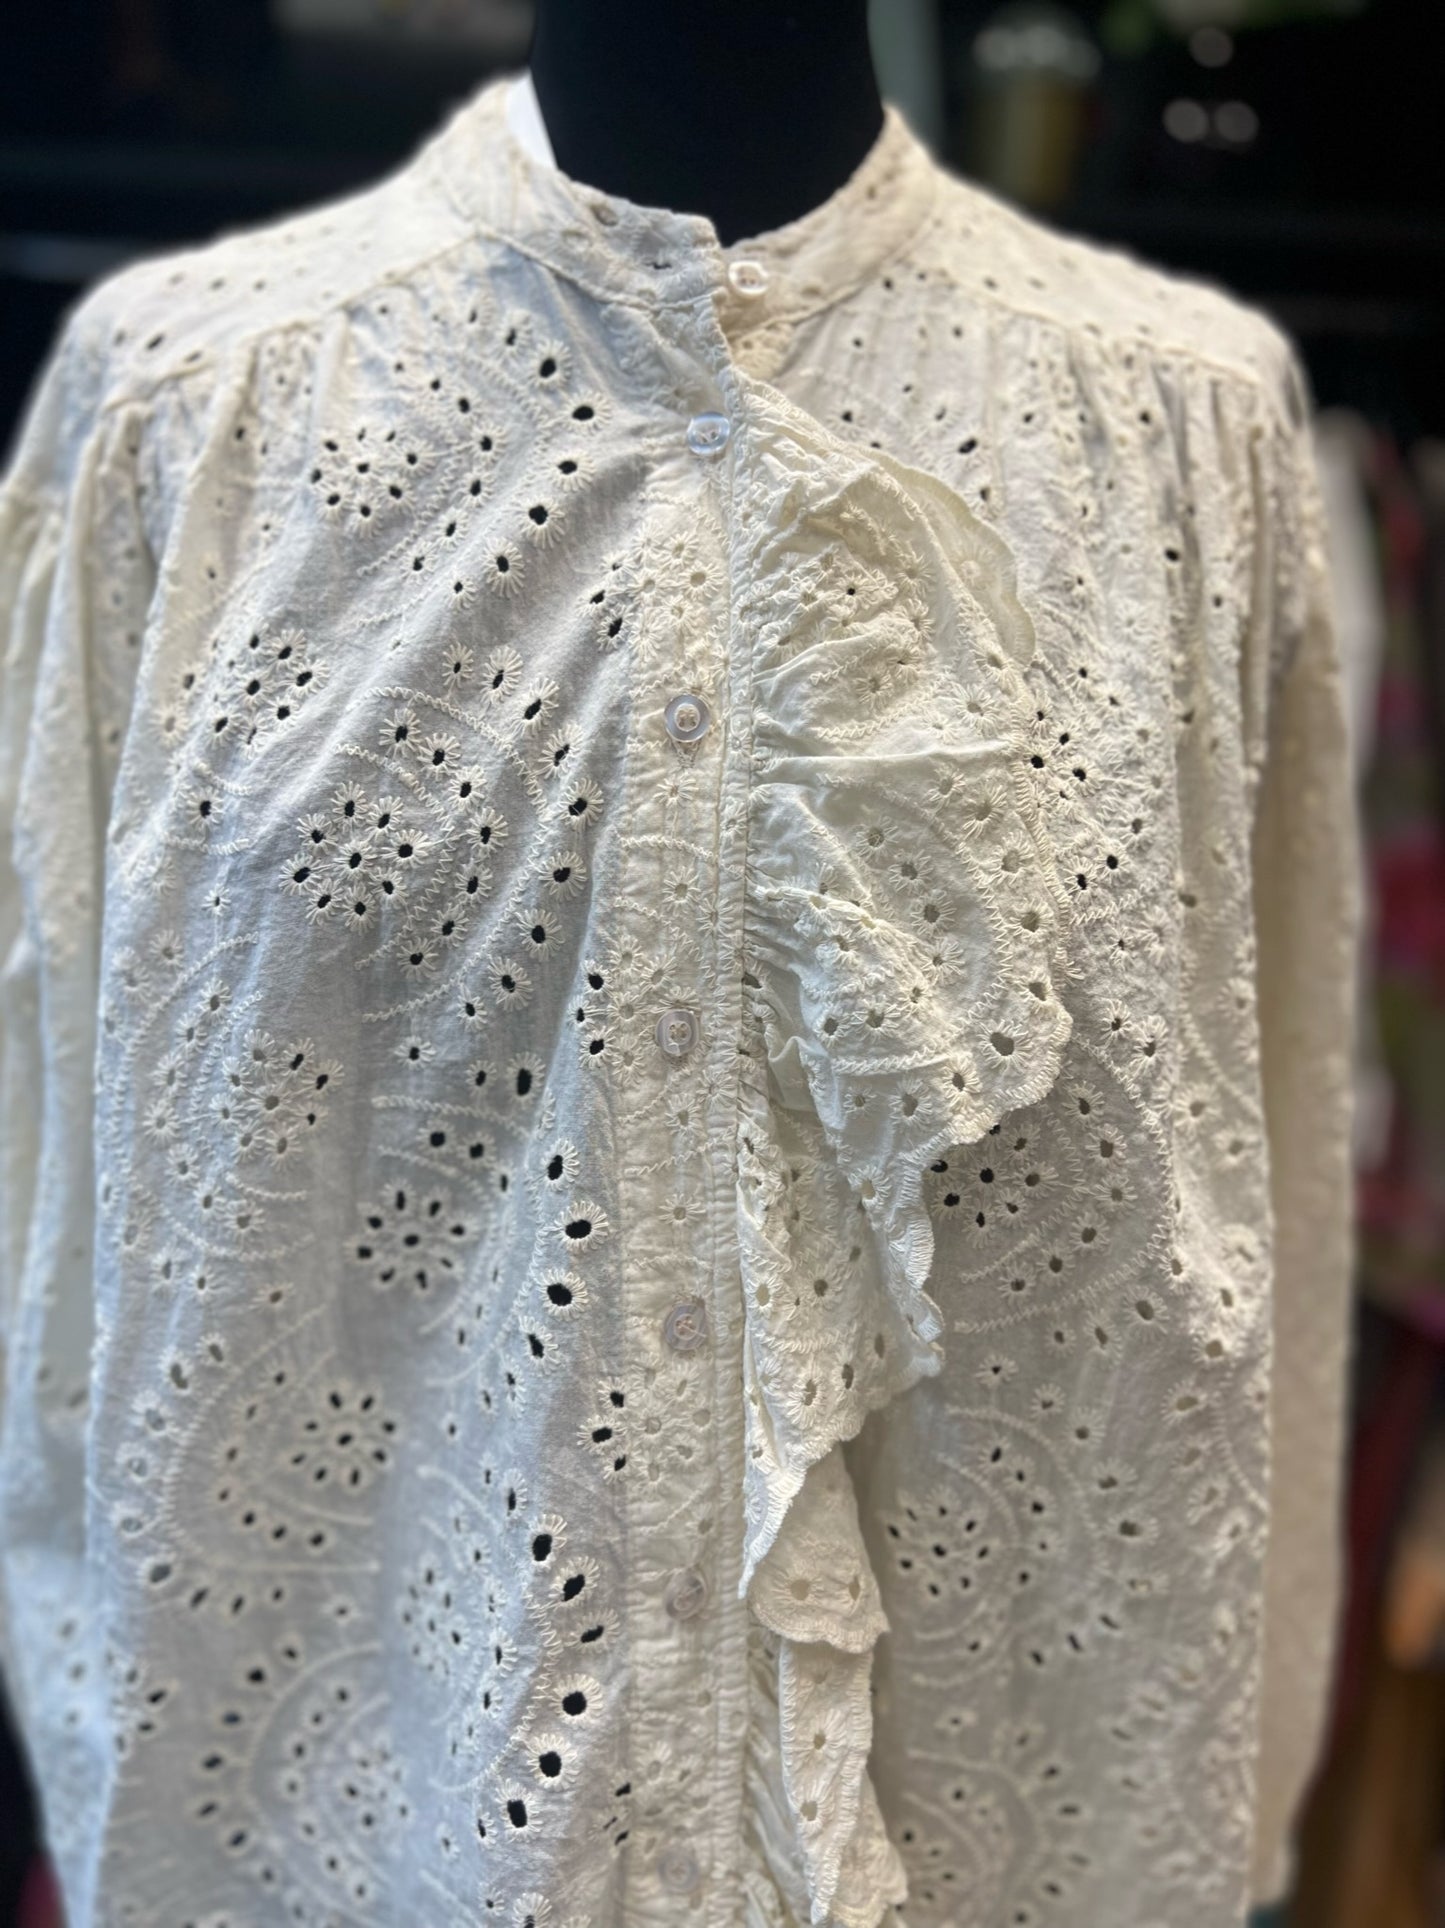 Chemise detail froufrou